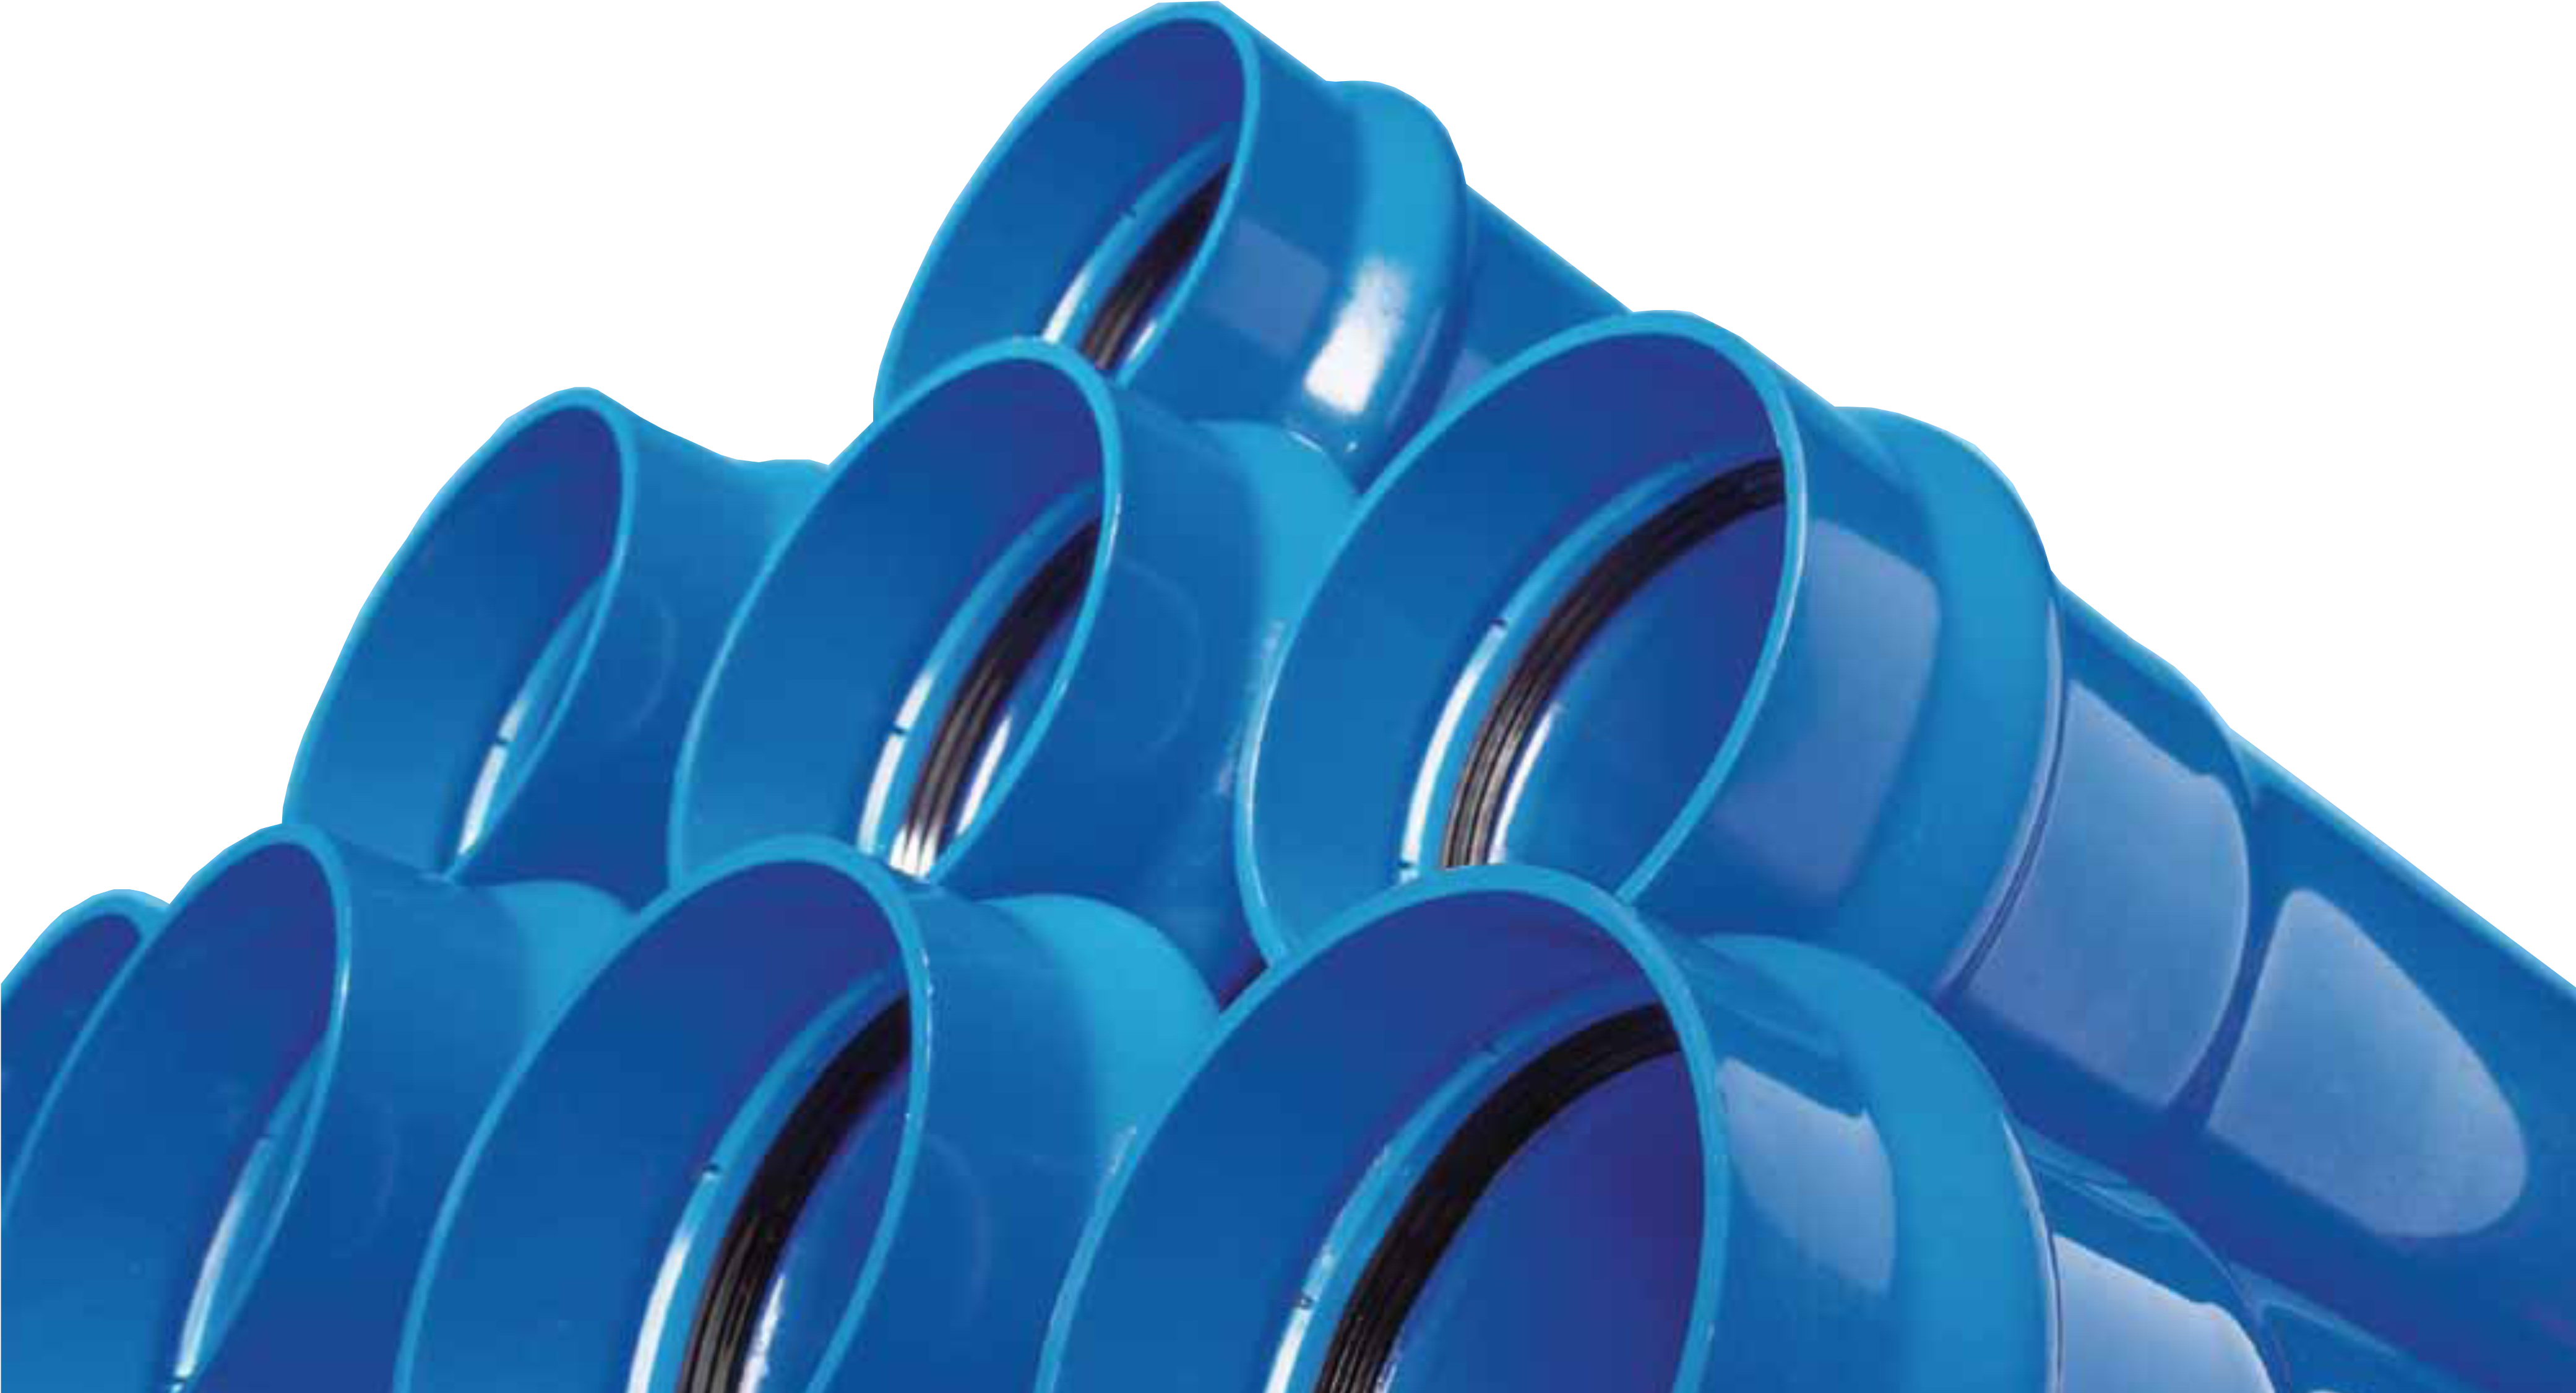 A Group Of Blue Pipes